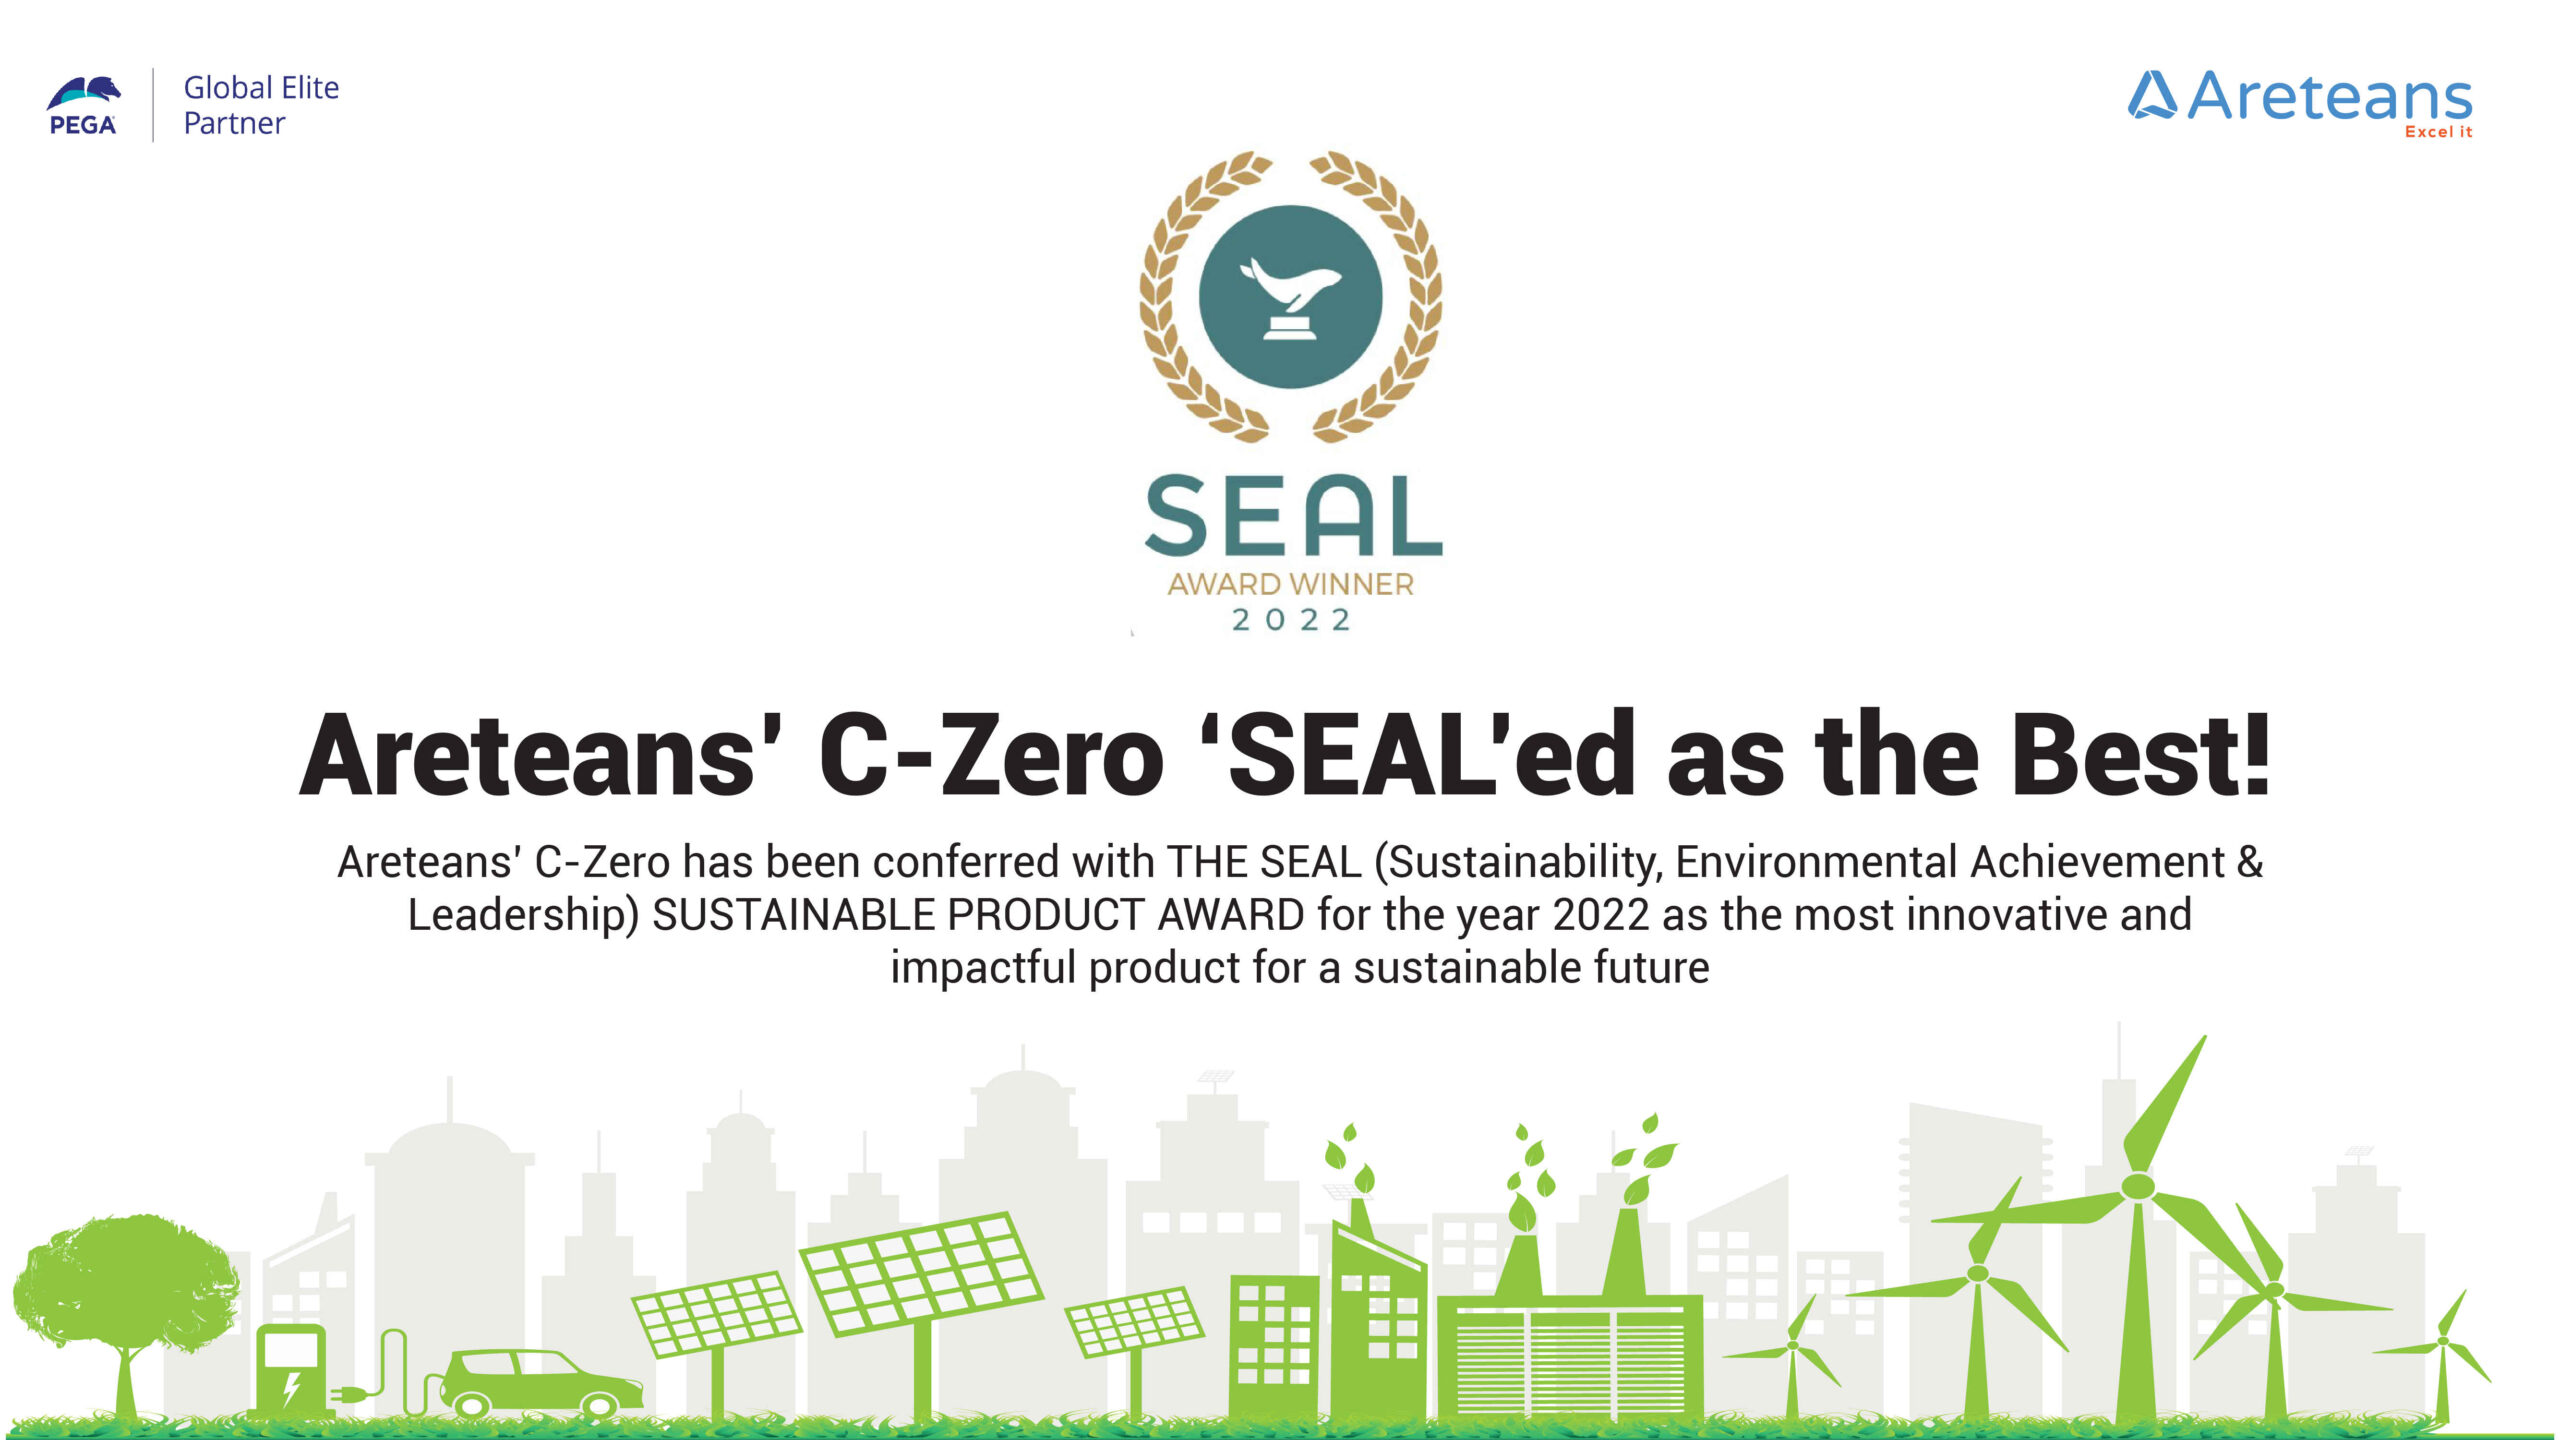 THE SEAL SUSTAINABLE PRODUCT AWARD